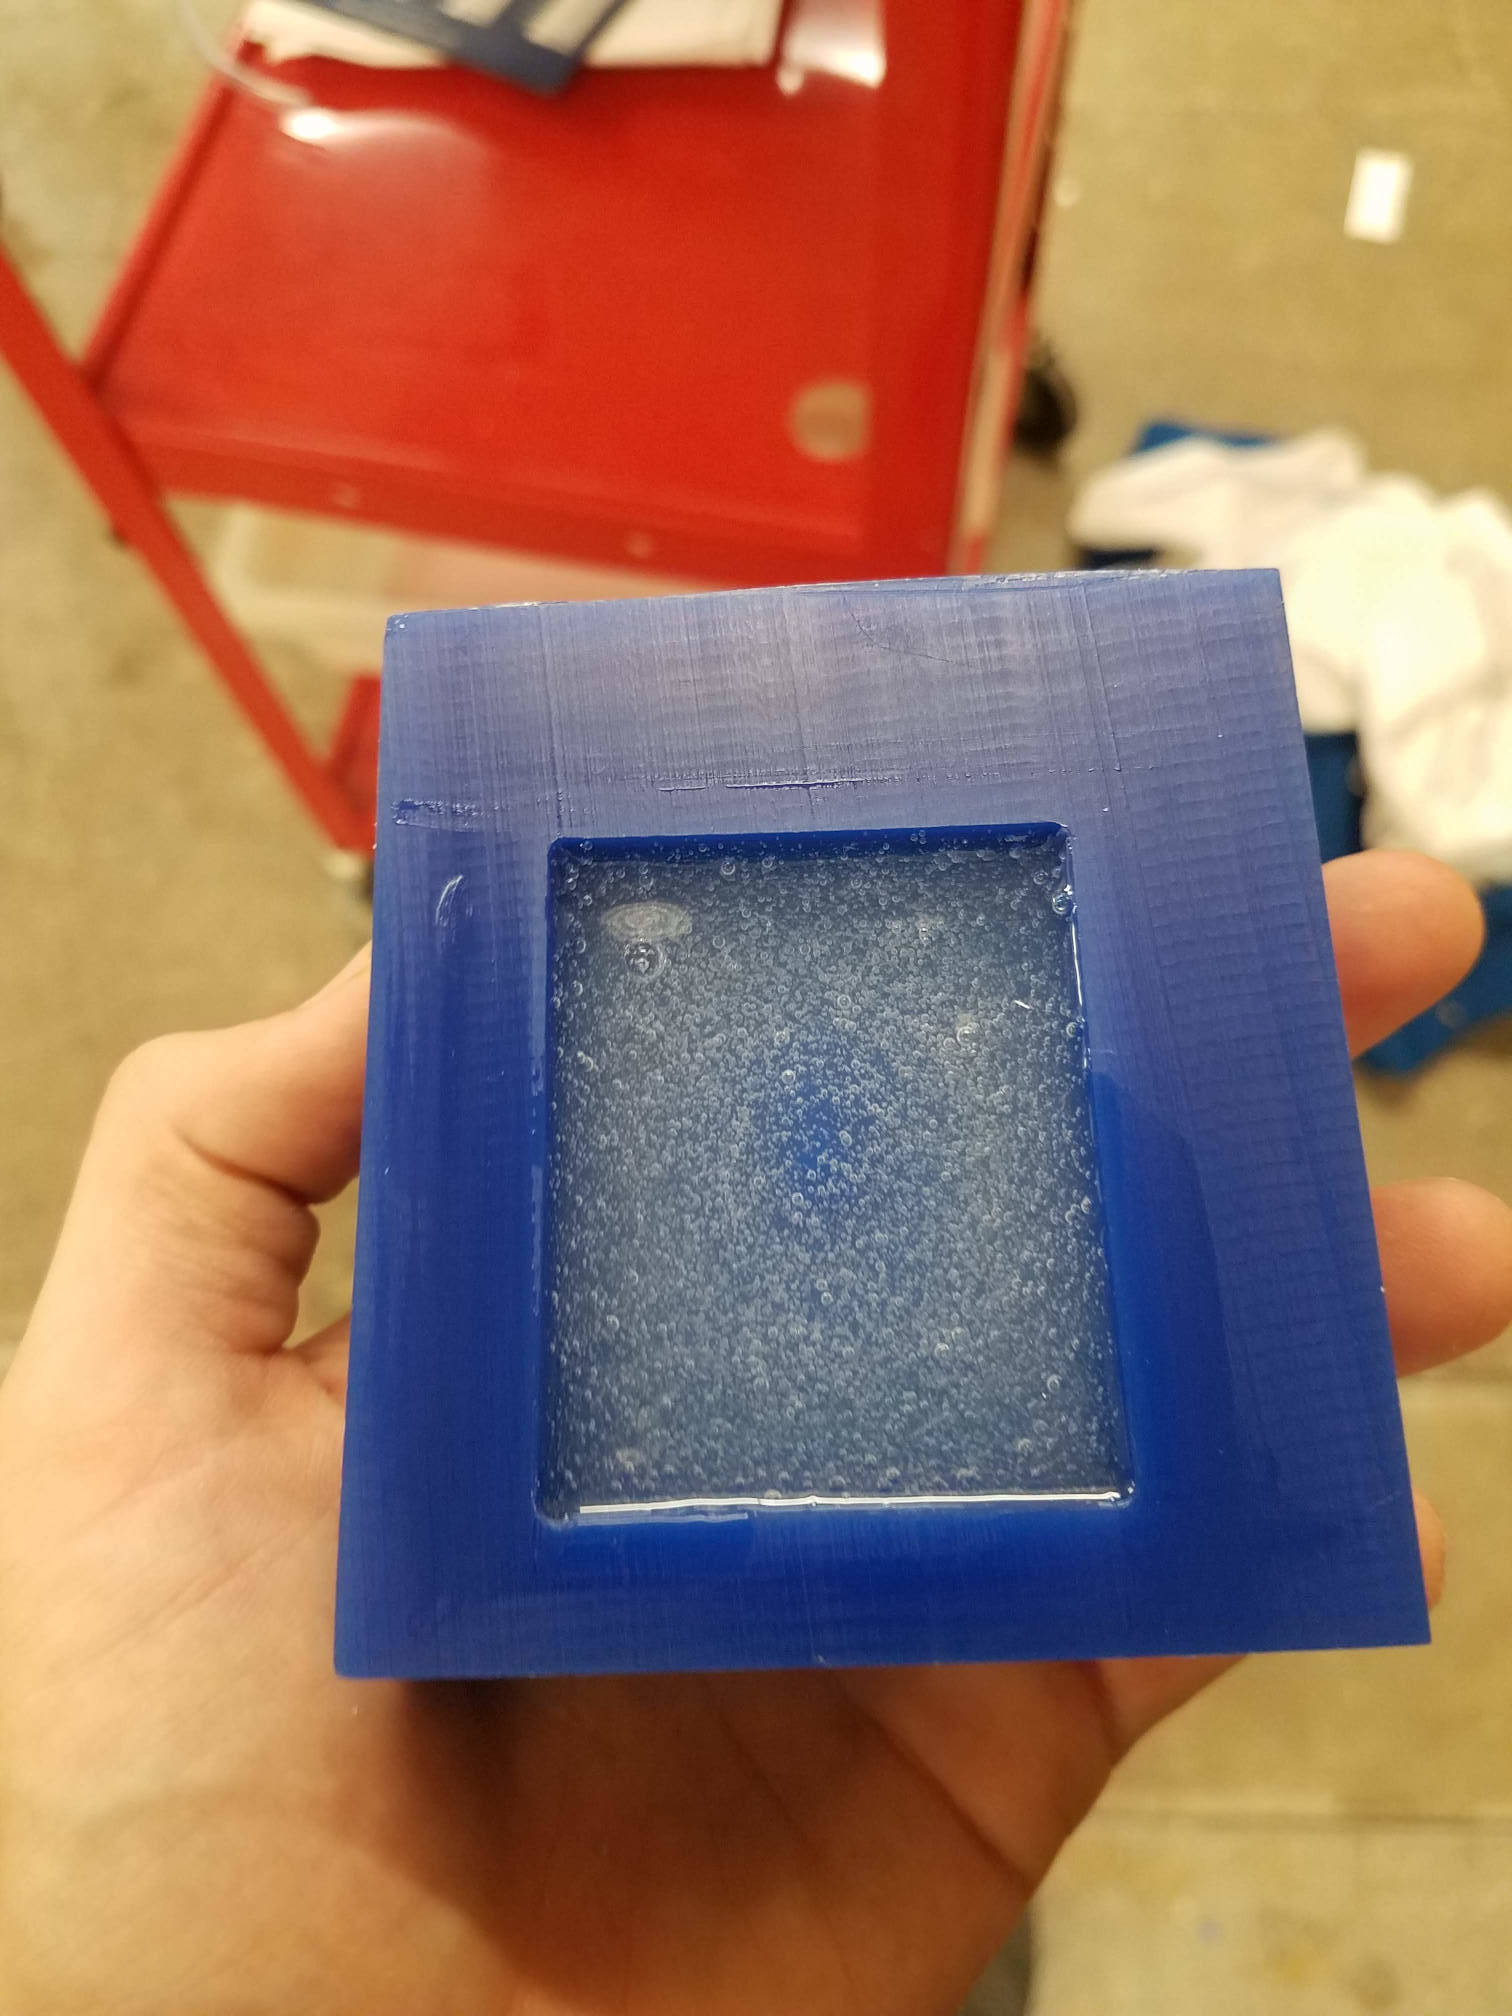 Filled mold